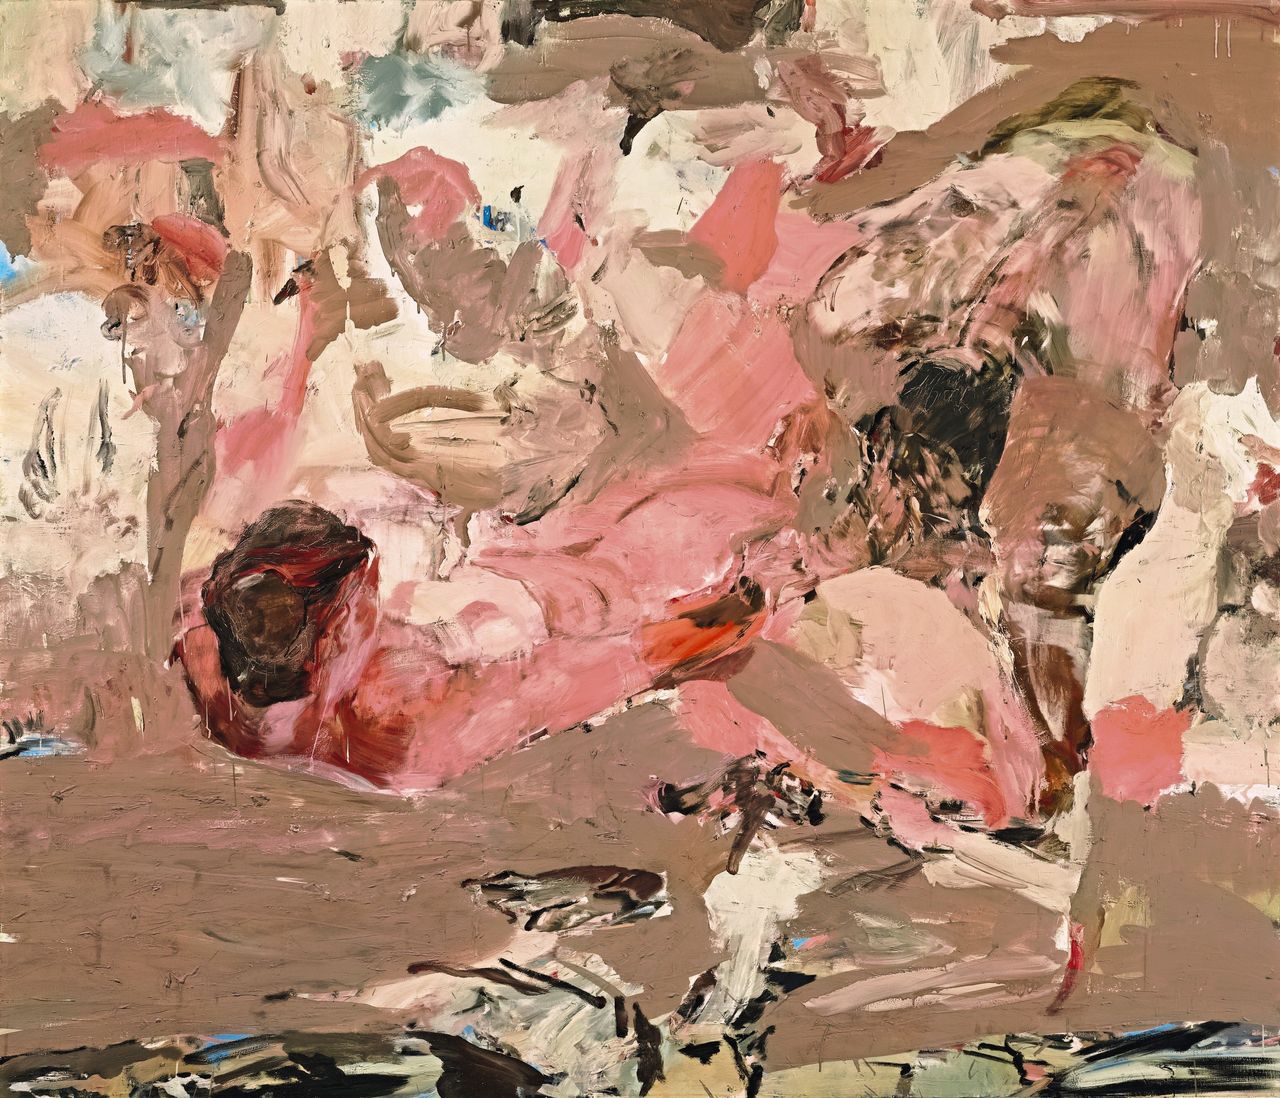 Cecily Brown, "Untitled"